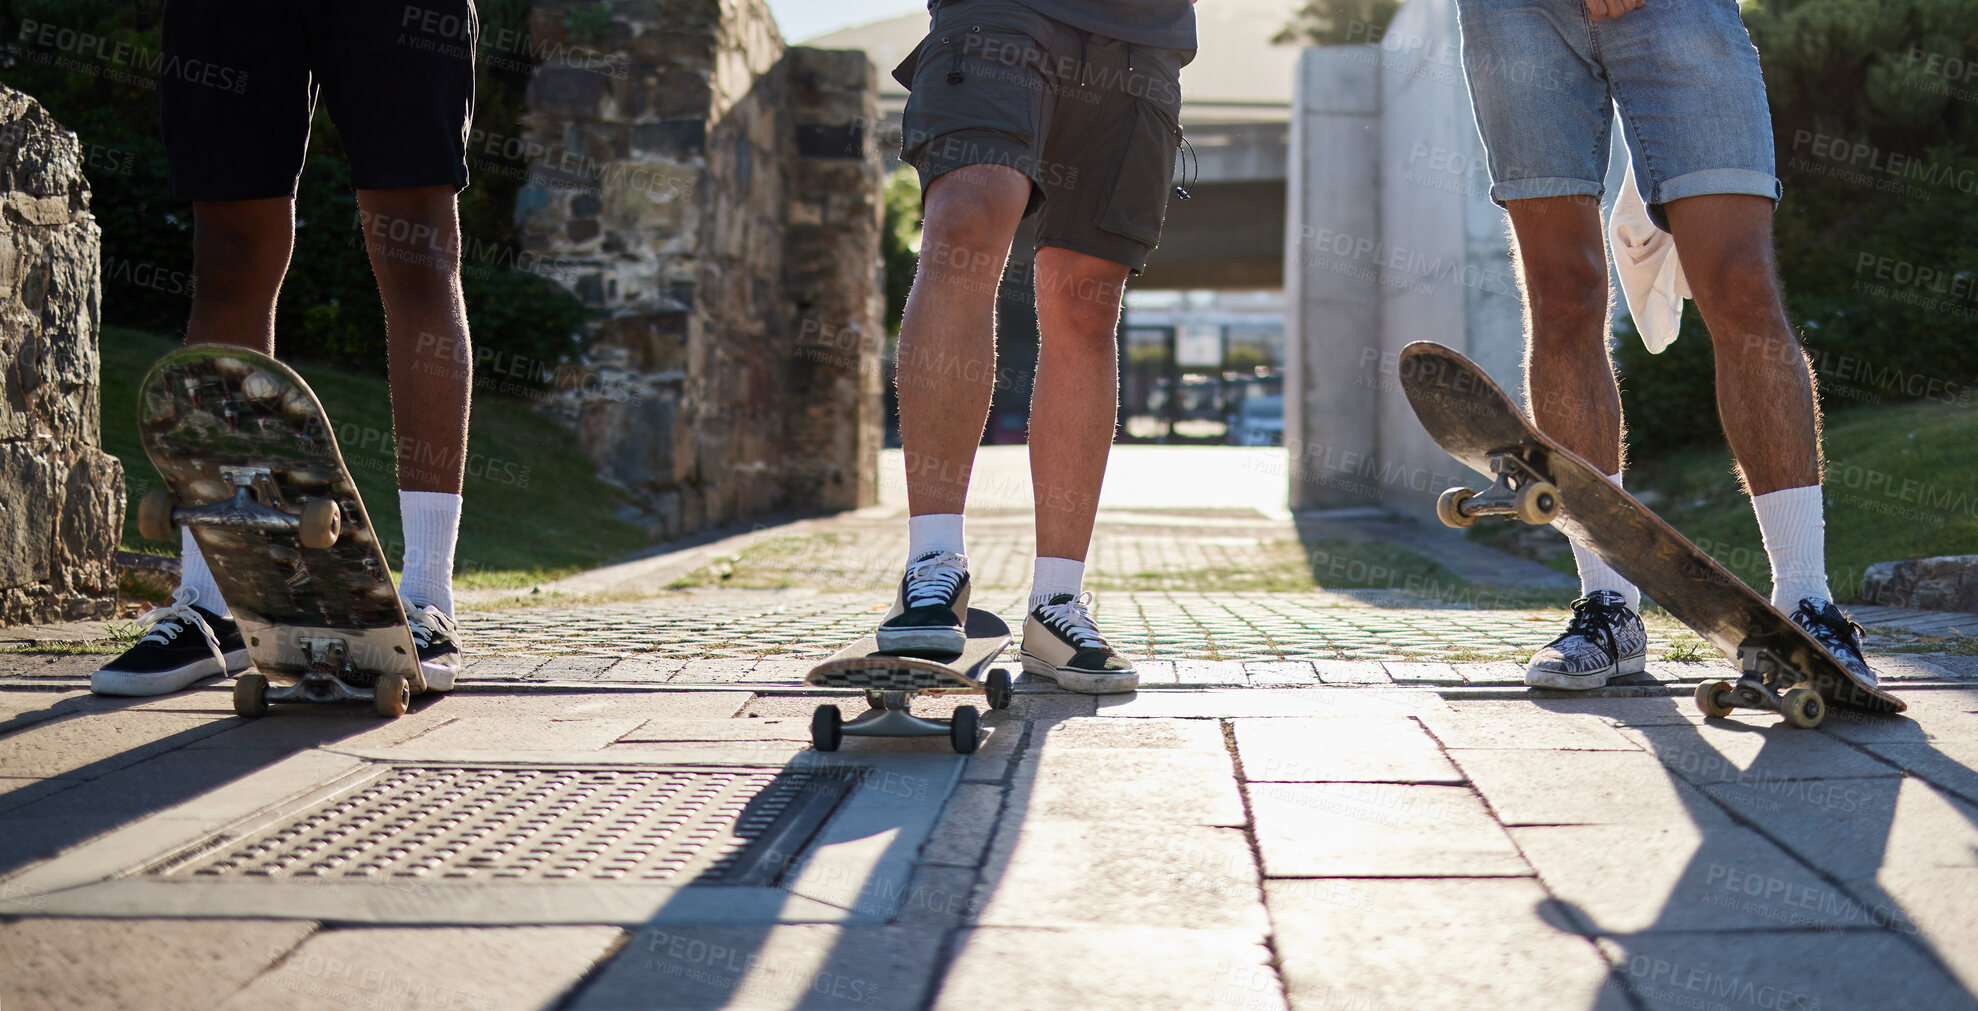 Buy stock photo Shoes, skateboard group and people in street, city or outdoors preparing for practice. Exercise, fitness and skateboarding sports, training and skaters standing together on urban road after workout.